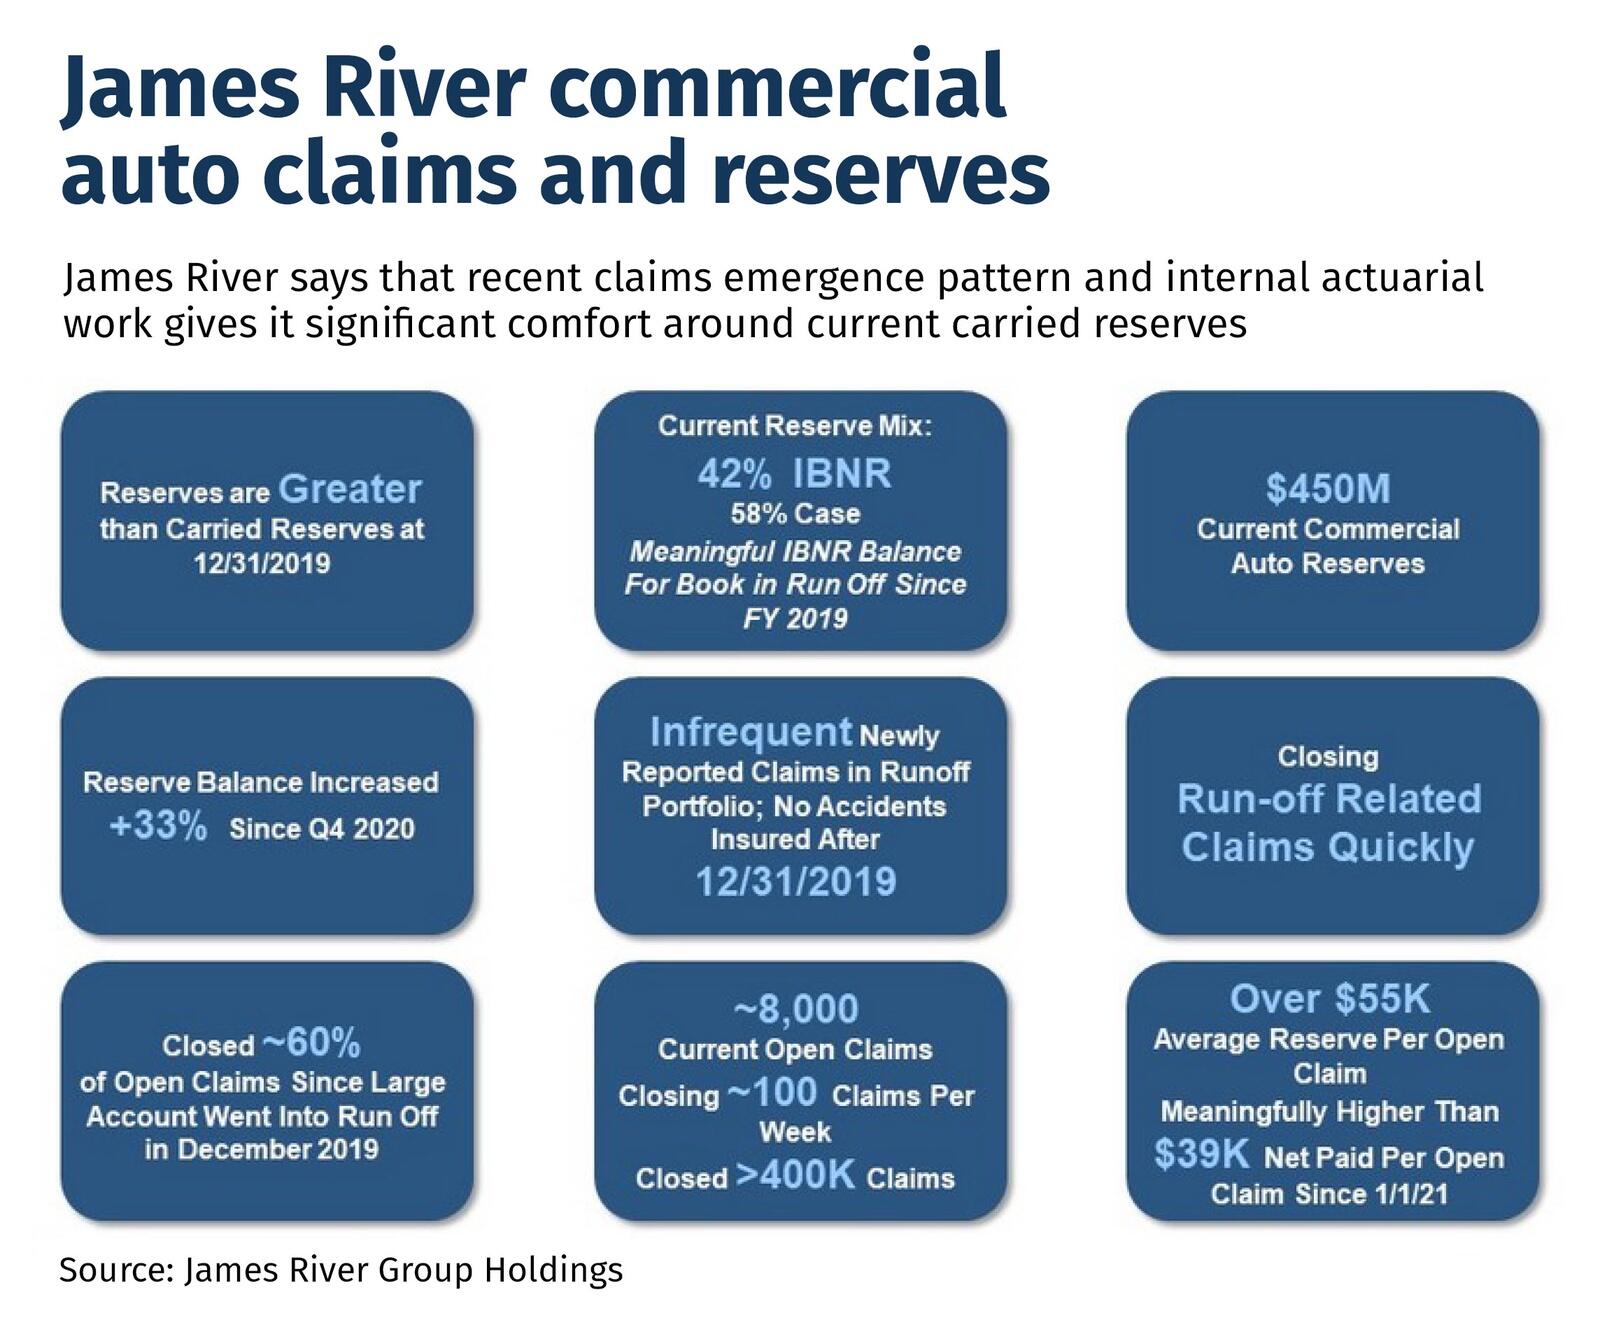 James River commercial auto claims and reserves